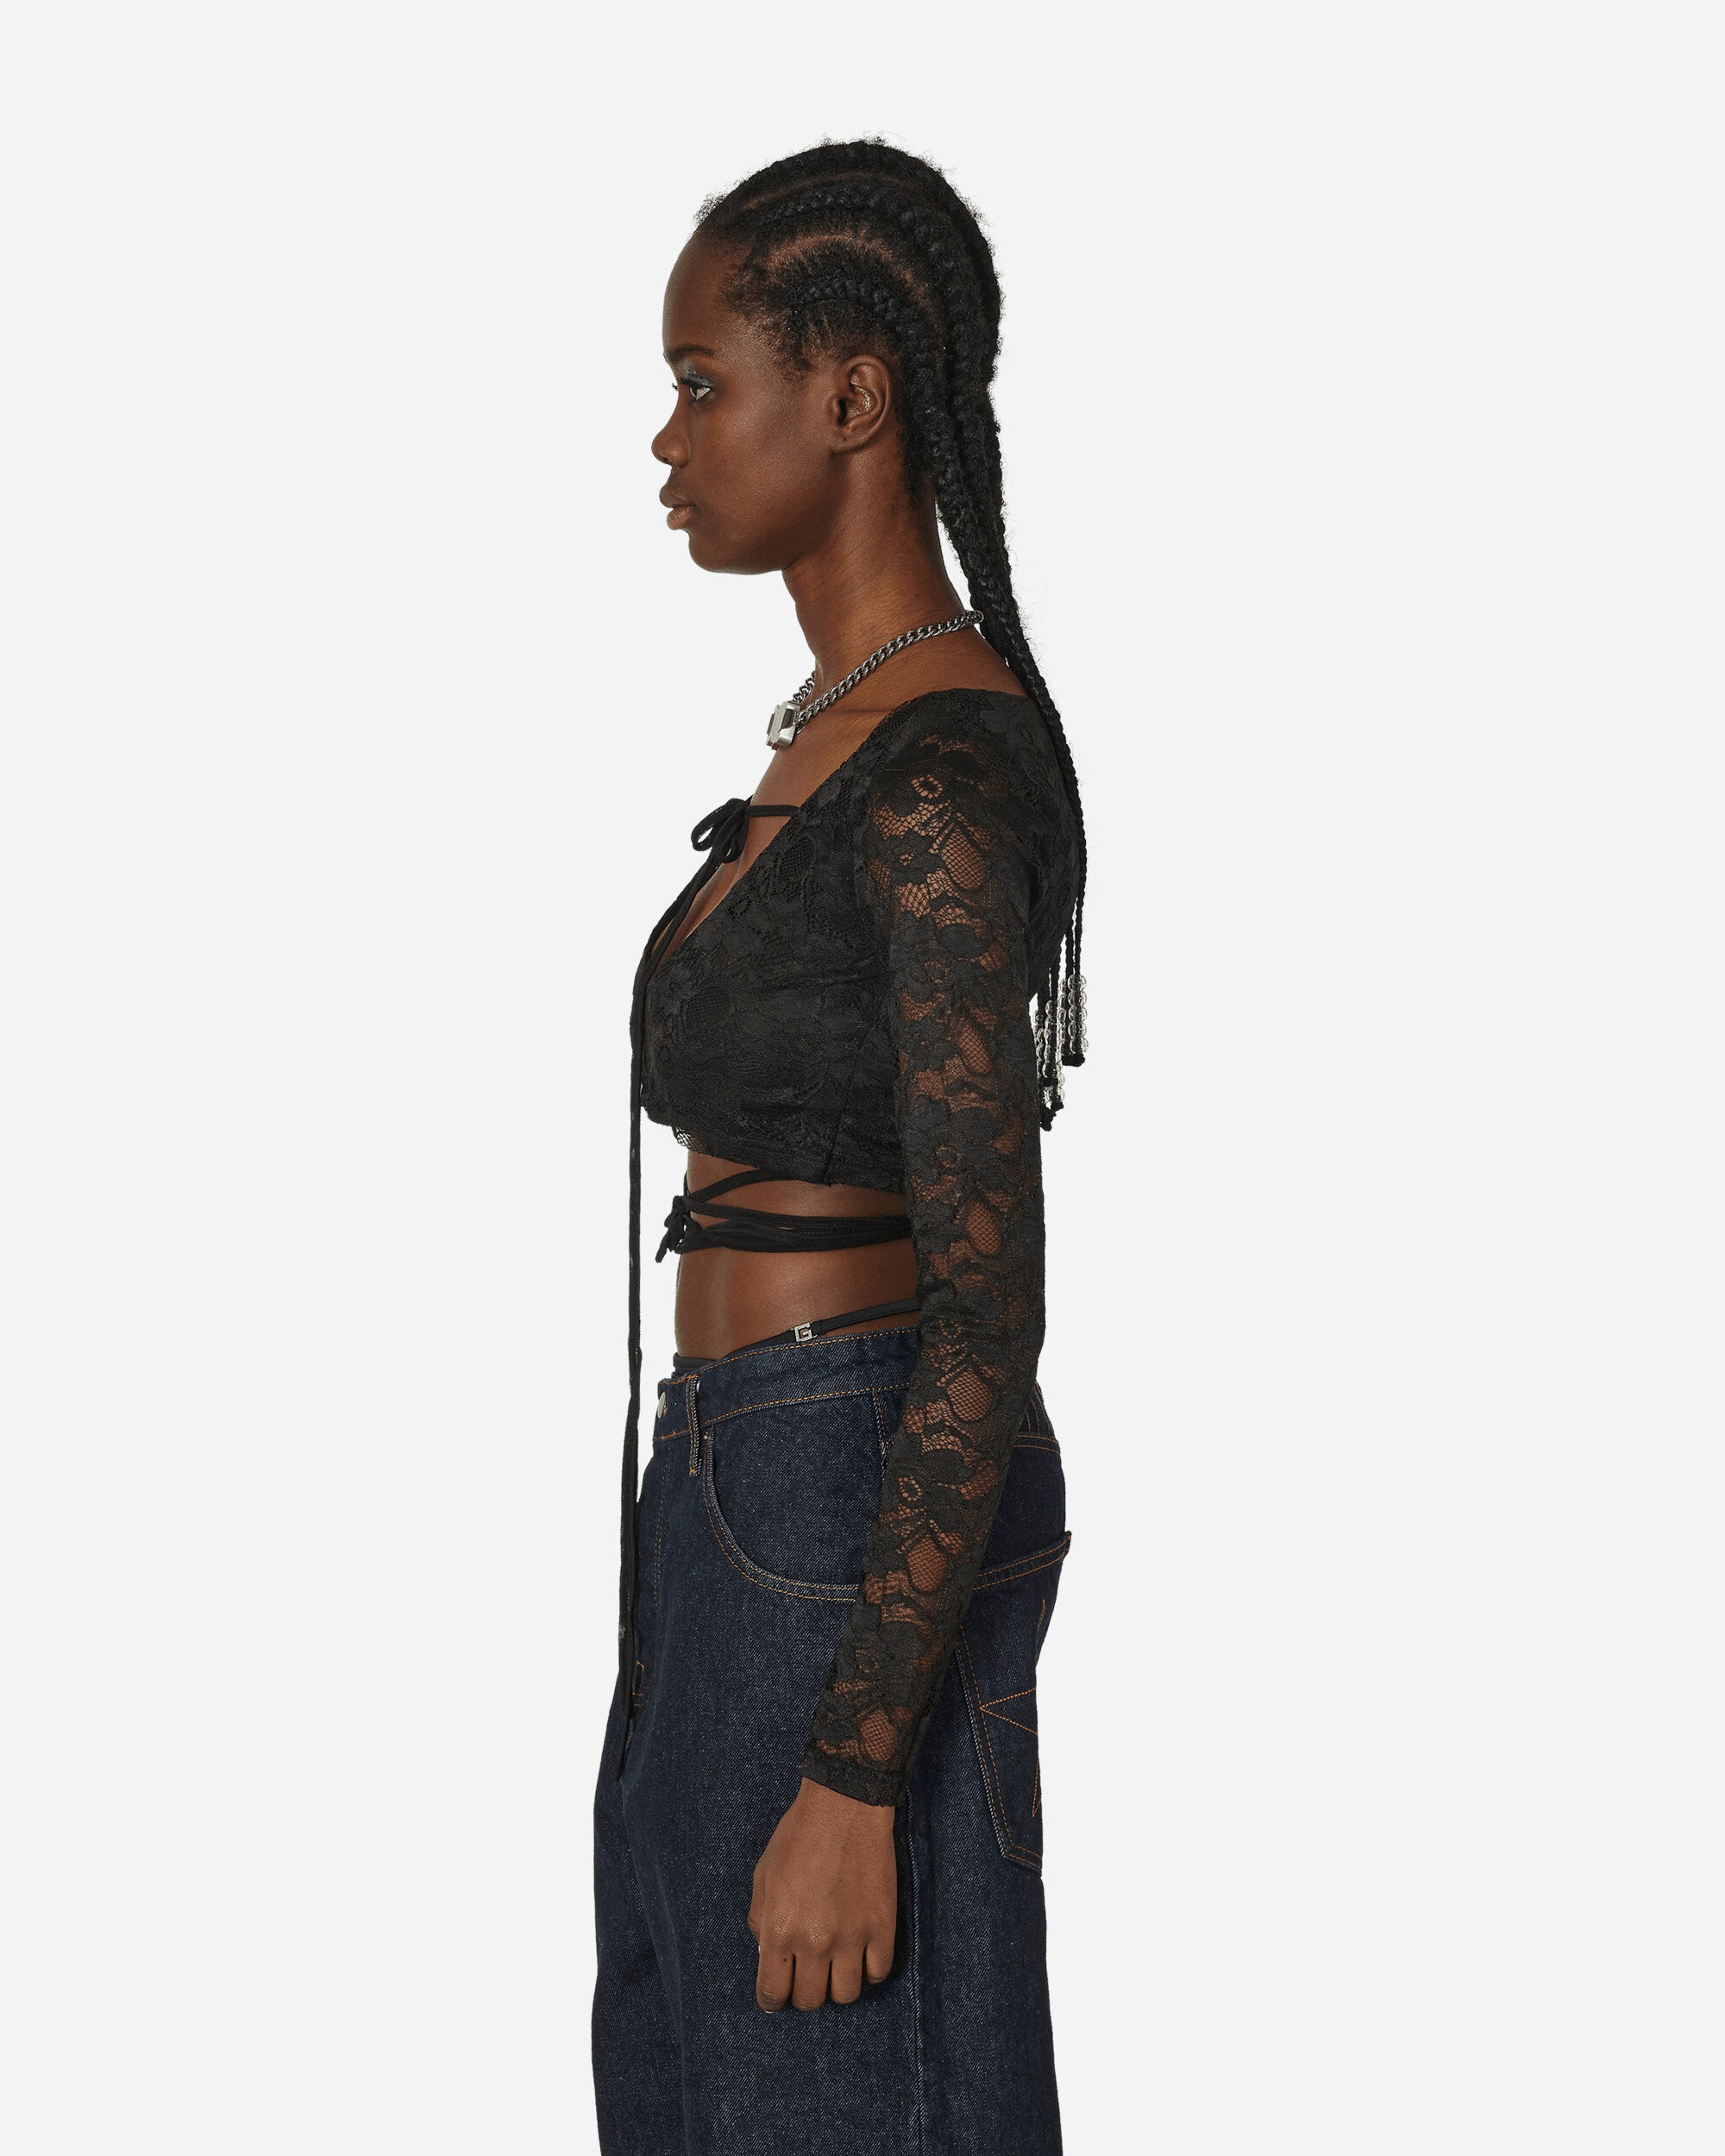 Nii Hai Wmns Lace Crop Top In Black Black T-Shirts Cropped TPS-LSCT BLK